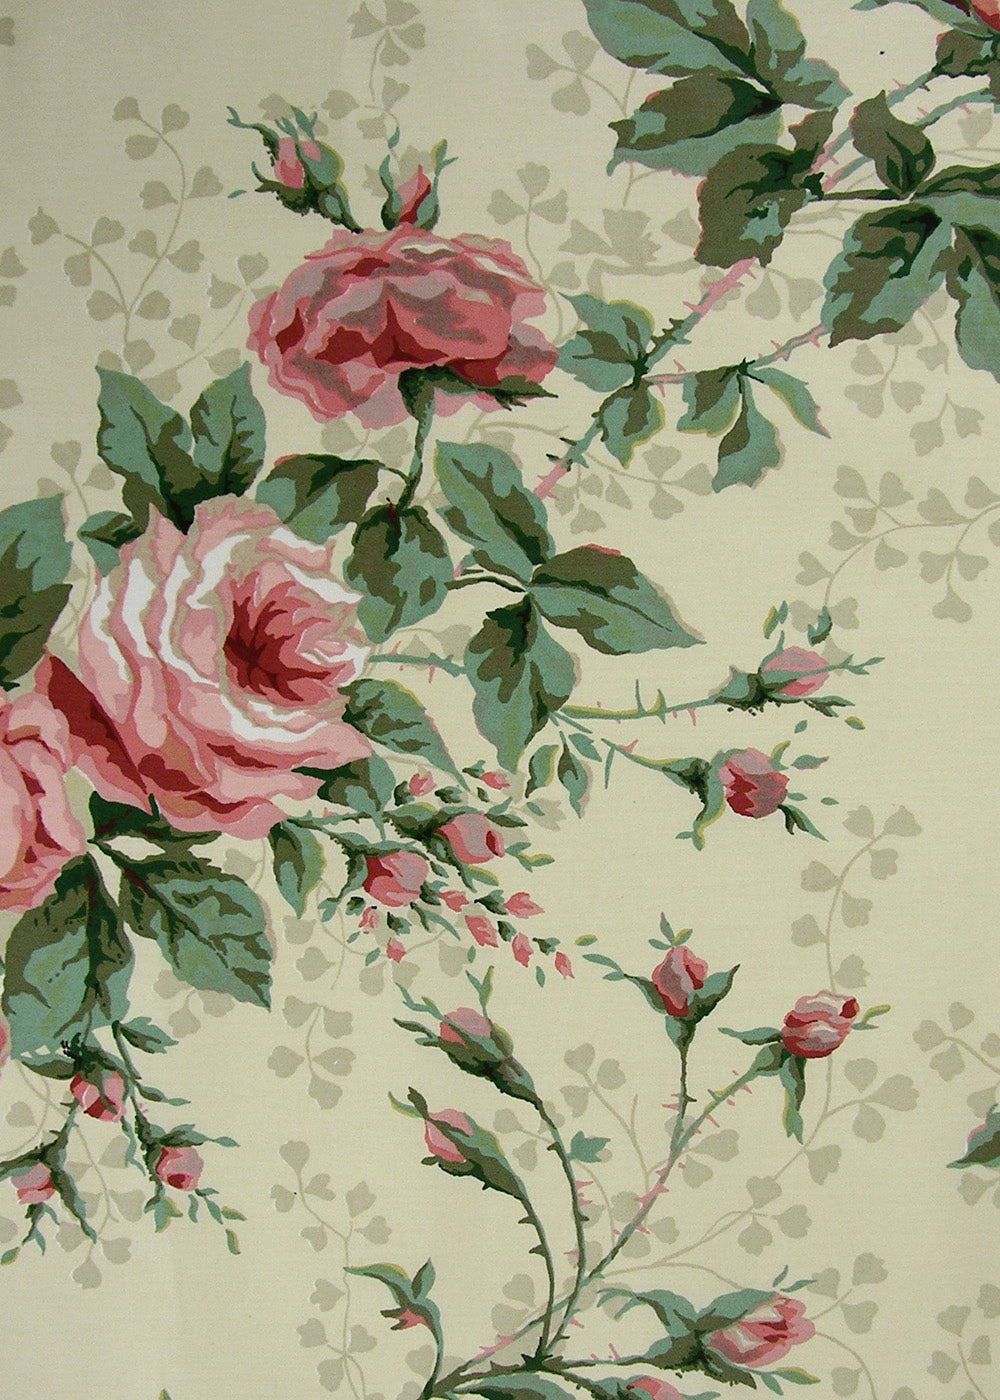 light butter yellow fabric printed with roses, rose buds, and branching vines